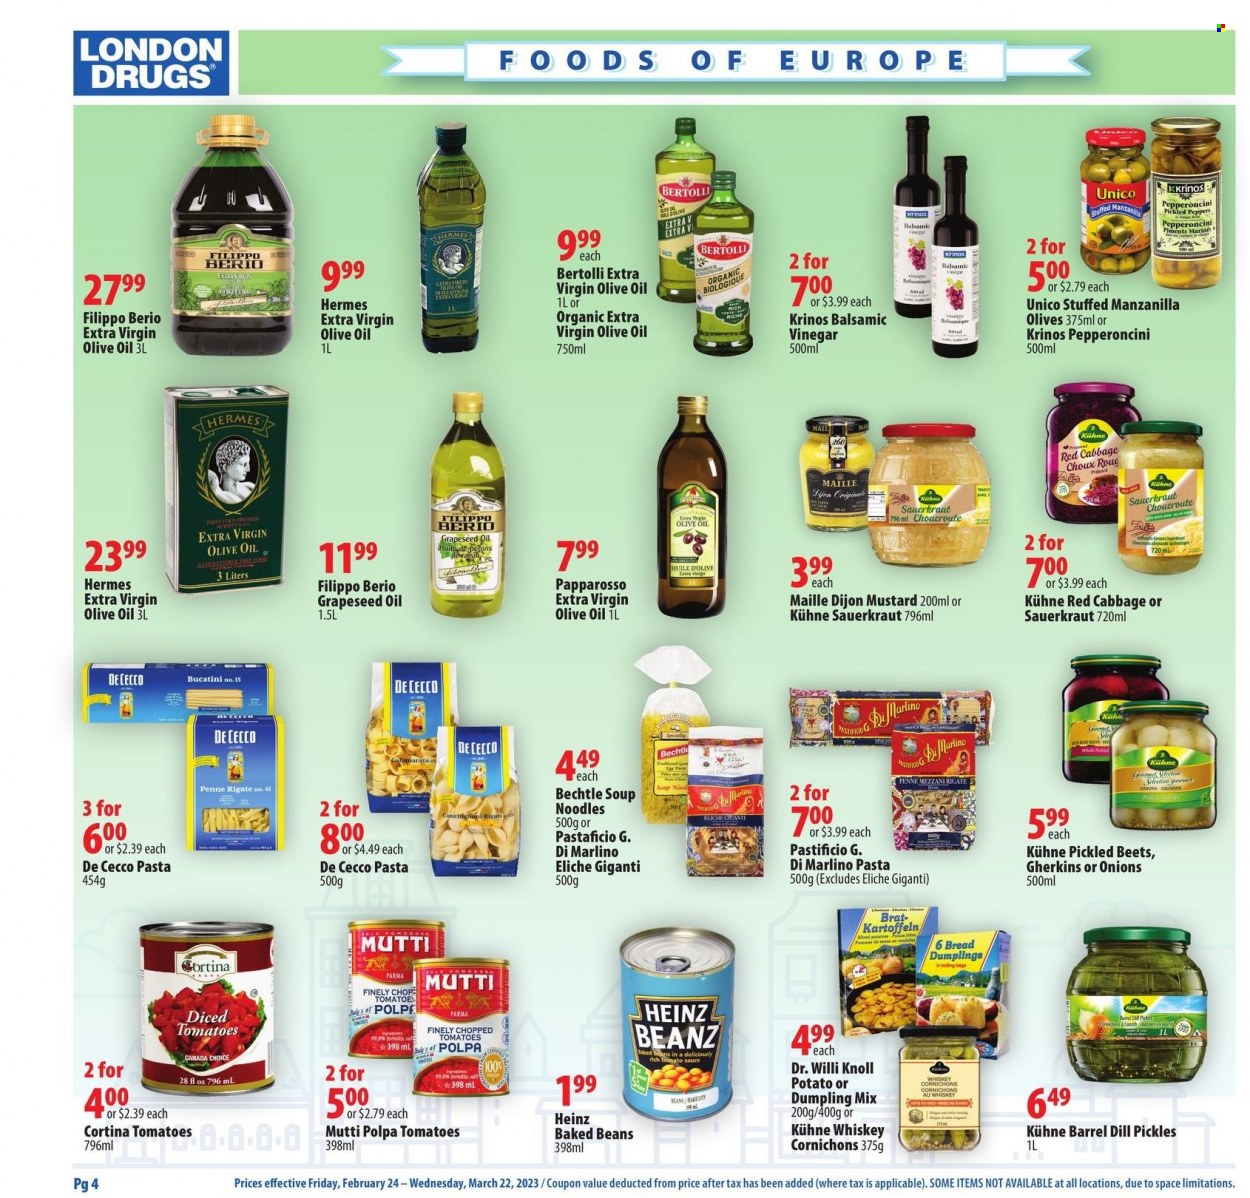 thumbnail - London Drugs Flyer - February 24, 2023 - March 22, 2023 - Sales products - beans, sauerkraut, pickles, soup, sauce, peppers, baked beans, Bertolli, chopped tomatoes, diced tomatoes, pasta, noodles, penne, dill, mustard, balsamic vinegar, extra virgin olive oil, vinegar, olive oil, oil, grape seed oil, whiskey, whisky, Dell, Heinz, olives. Page 4.